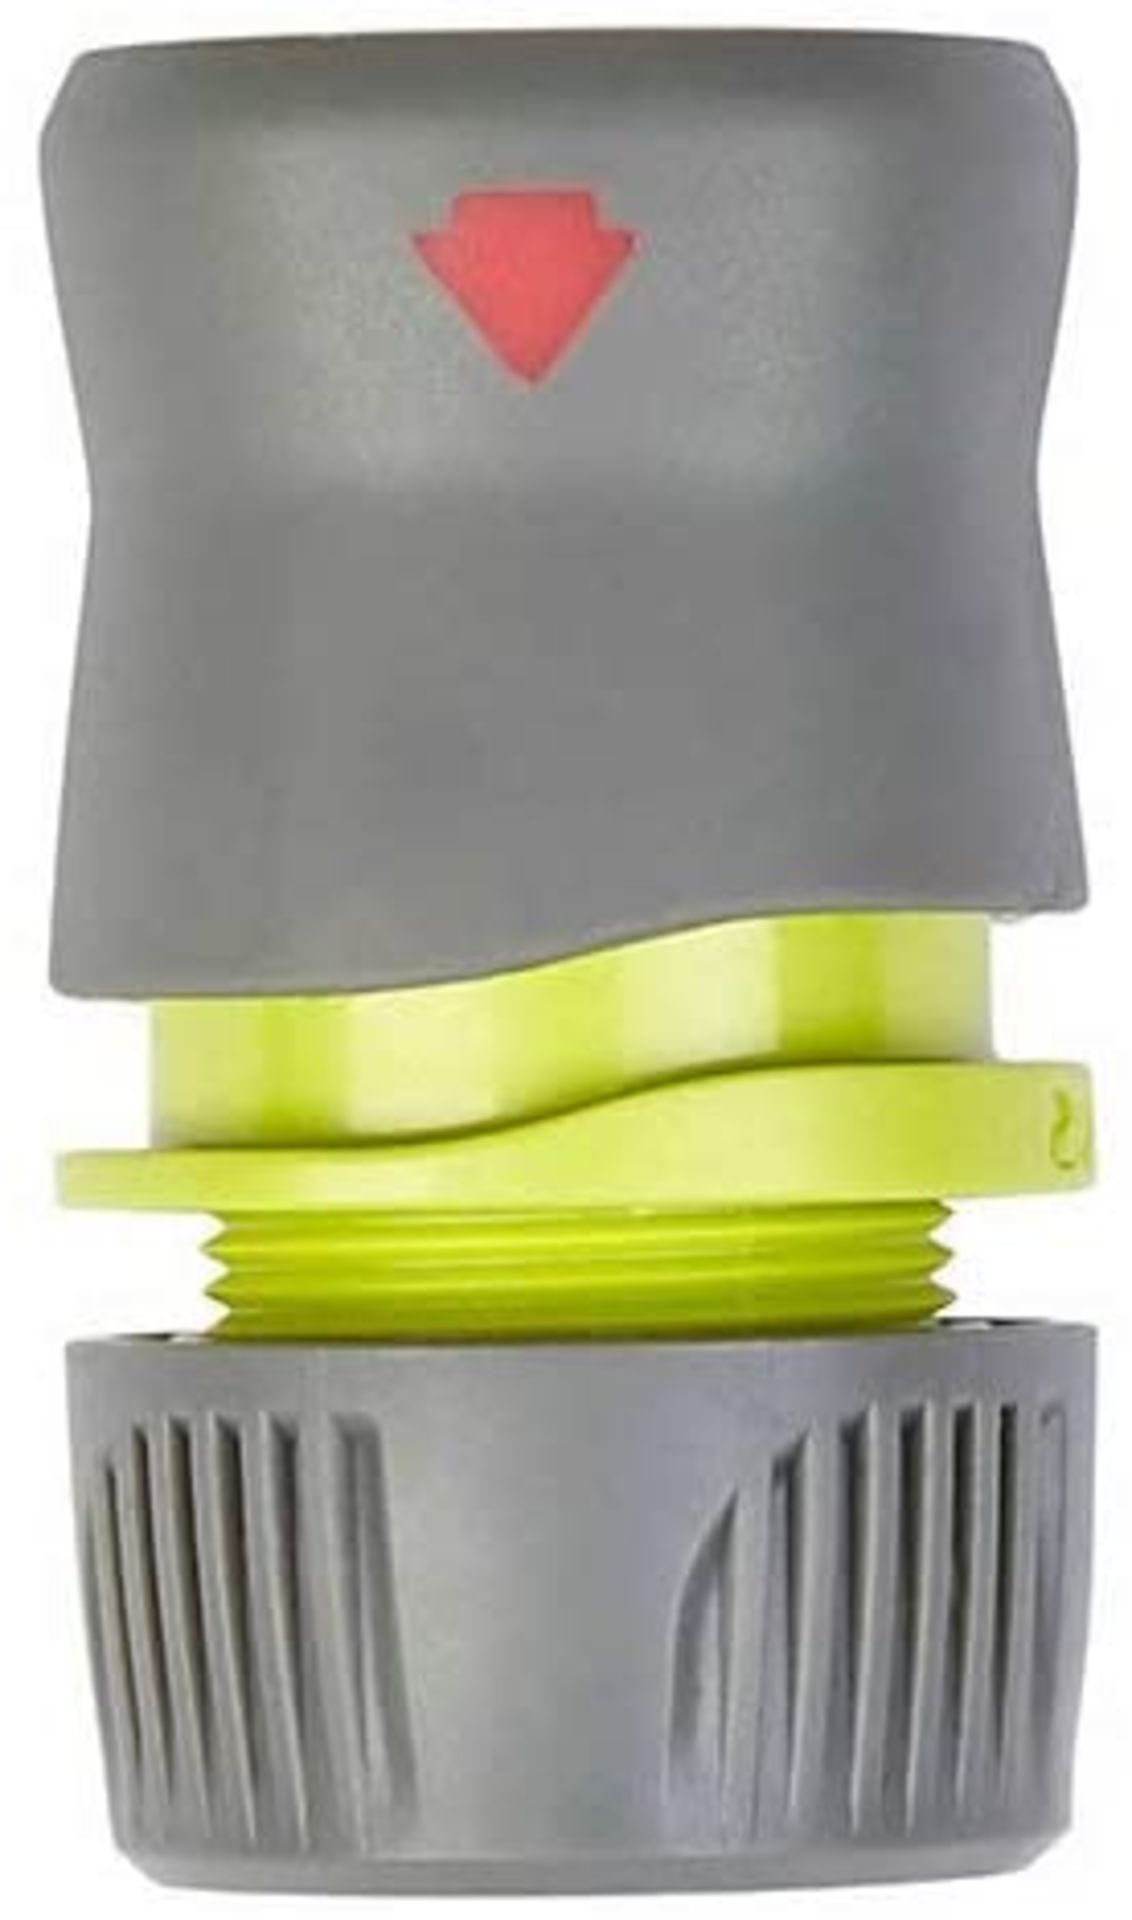 This Verve Aquastop Hose End Connector Is Best Suited For Use At The End Of The Hose Pipe. Soft